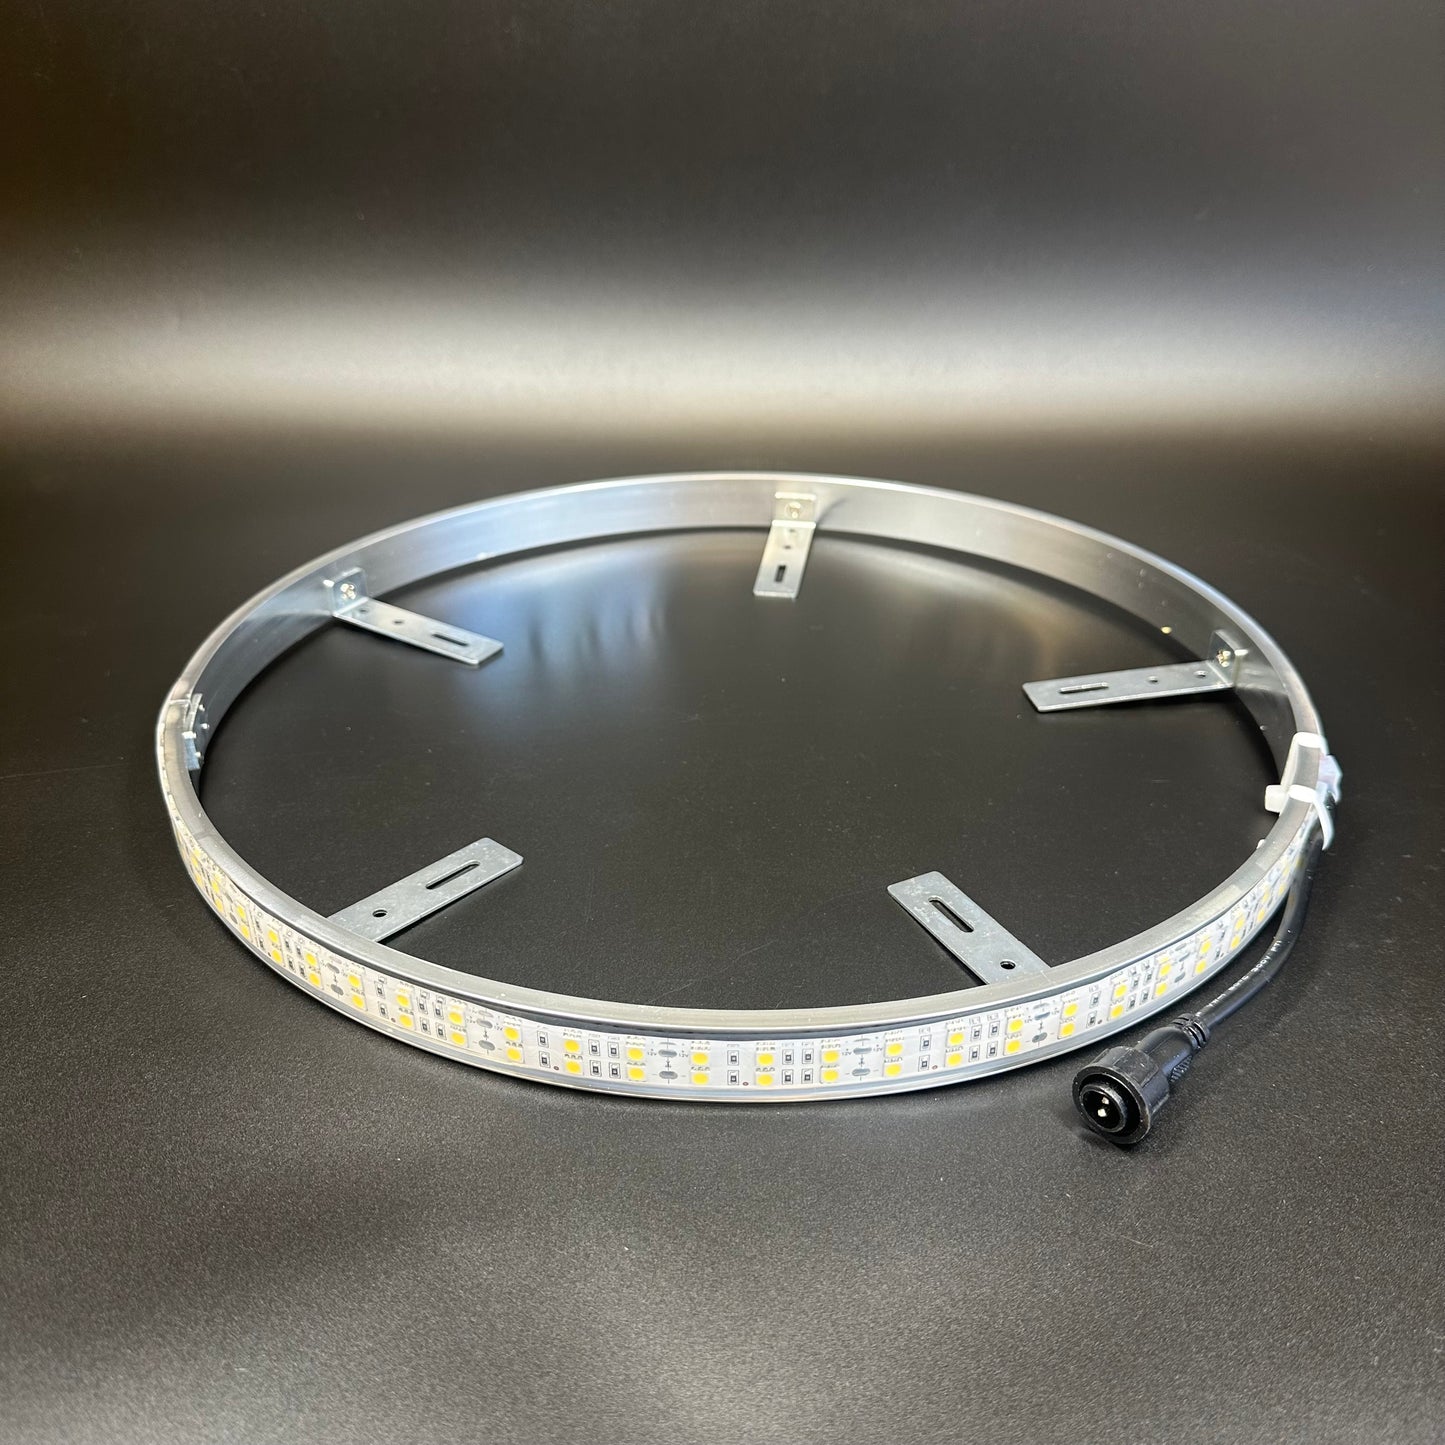 Wheel Light Ring and Strip